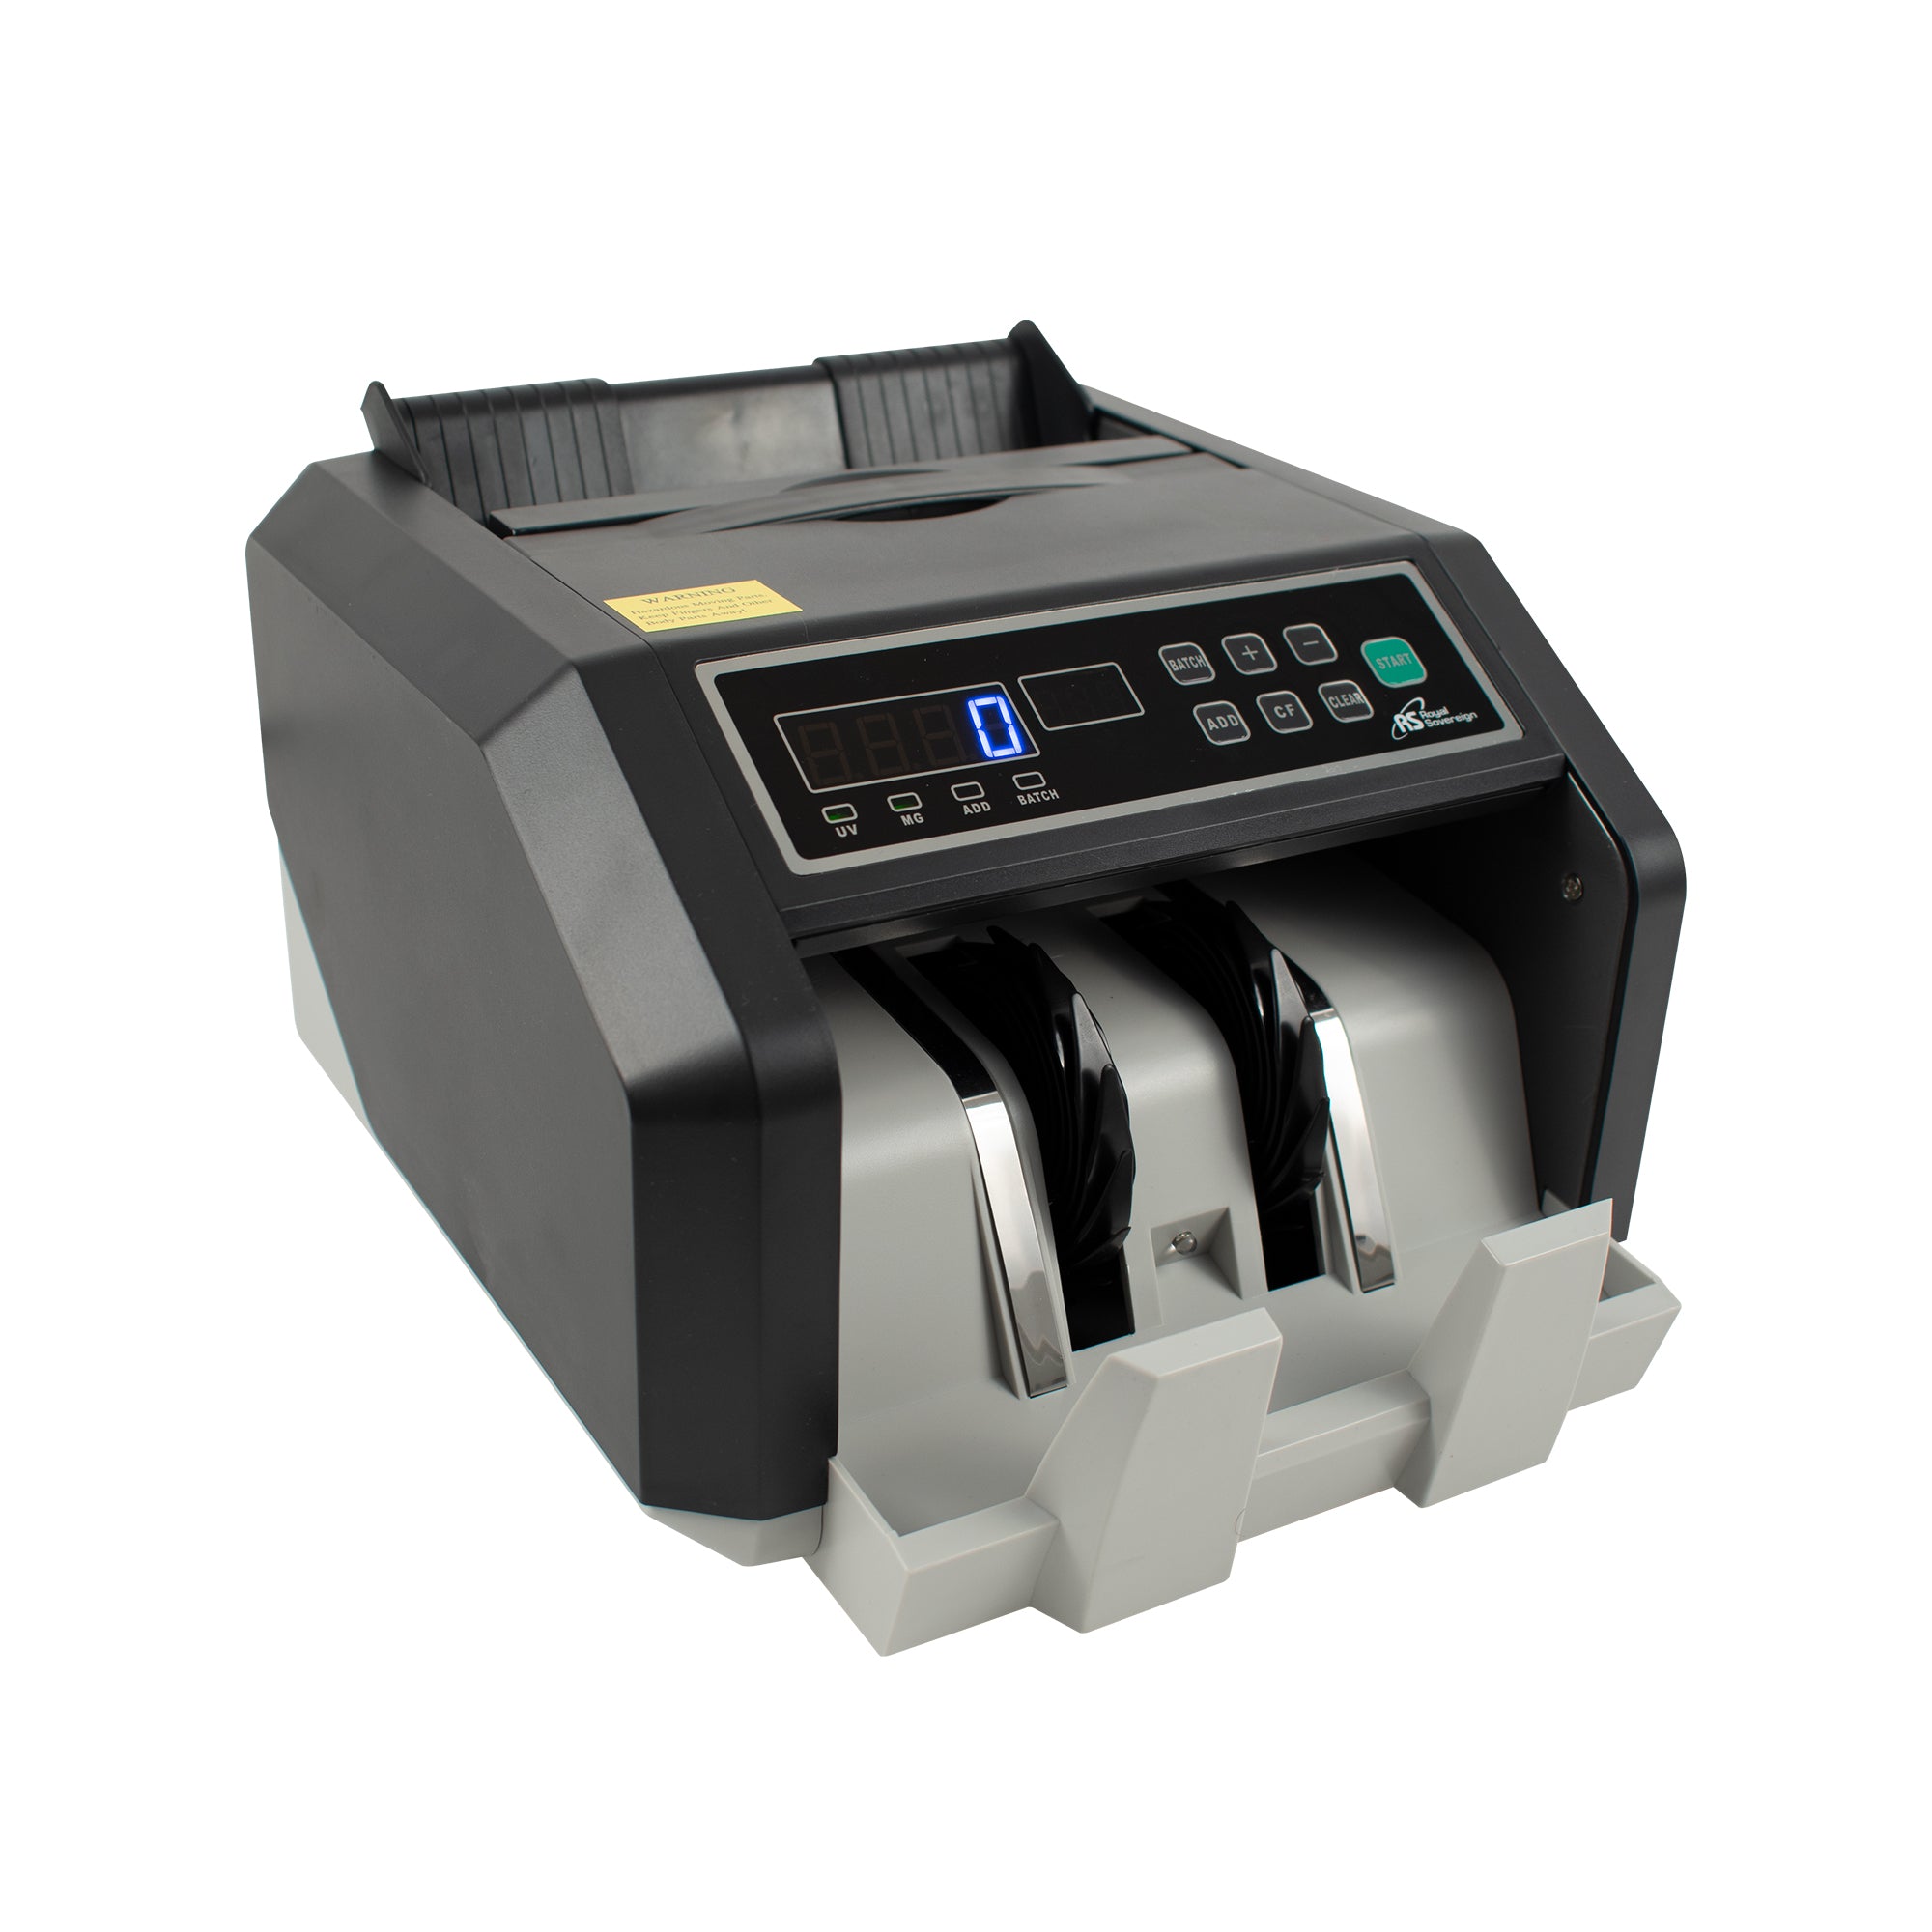 RBC-ES200, Bill Counter with Counterfeit Identification